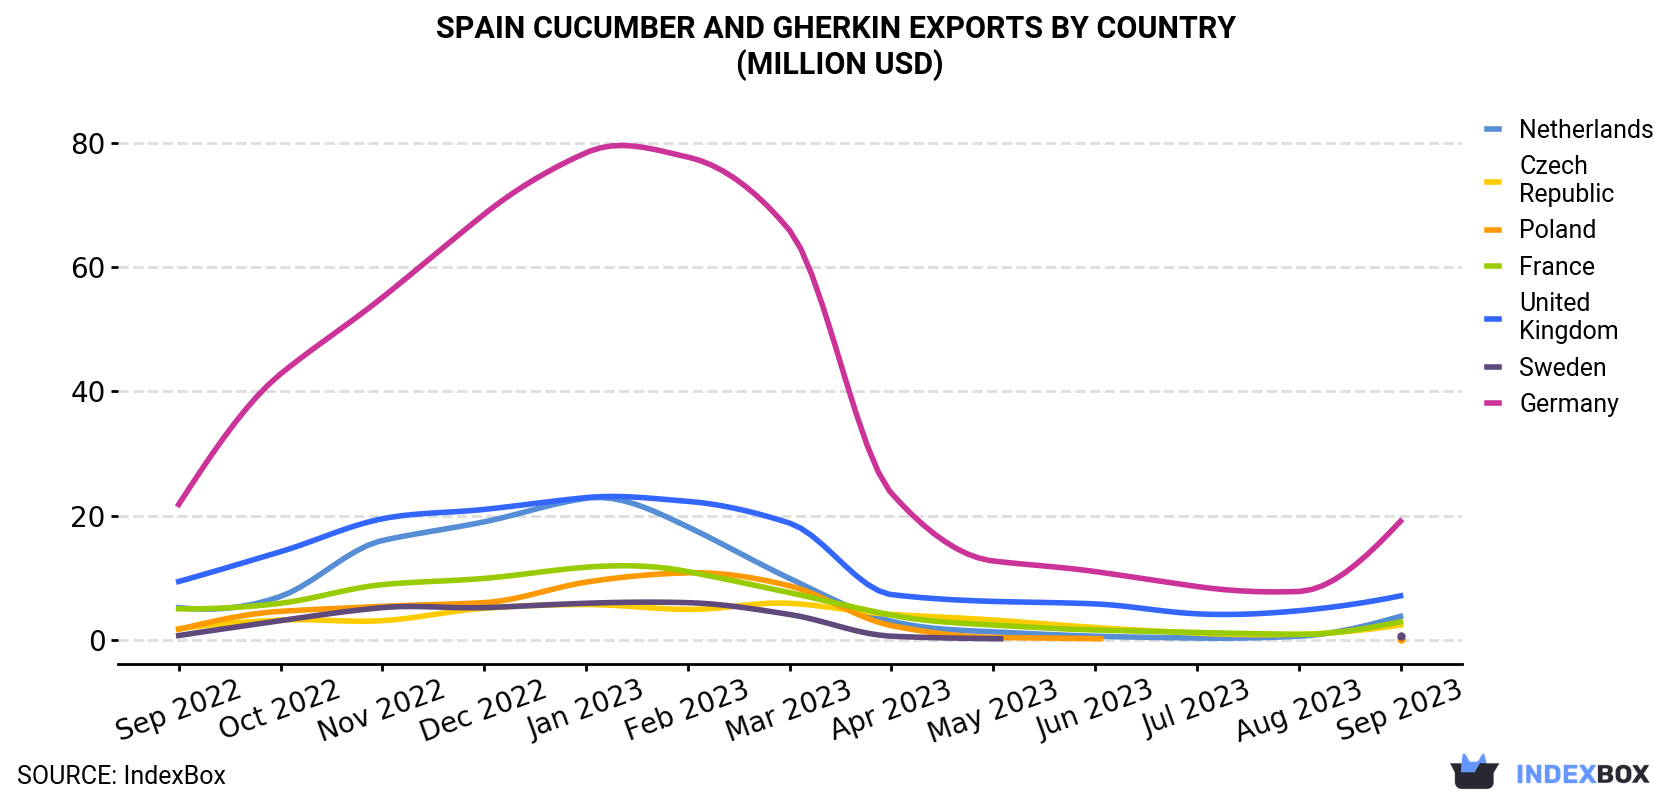 Spain Cucumber And Gherkin Exports By Country (Million USD)